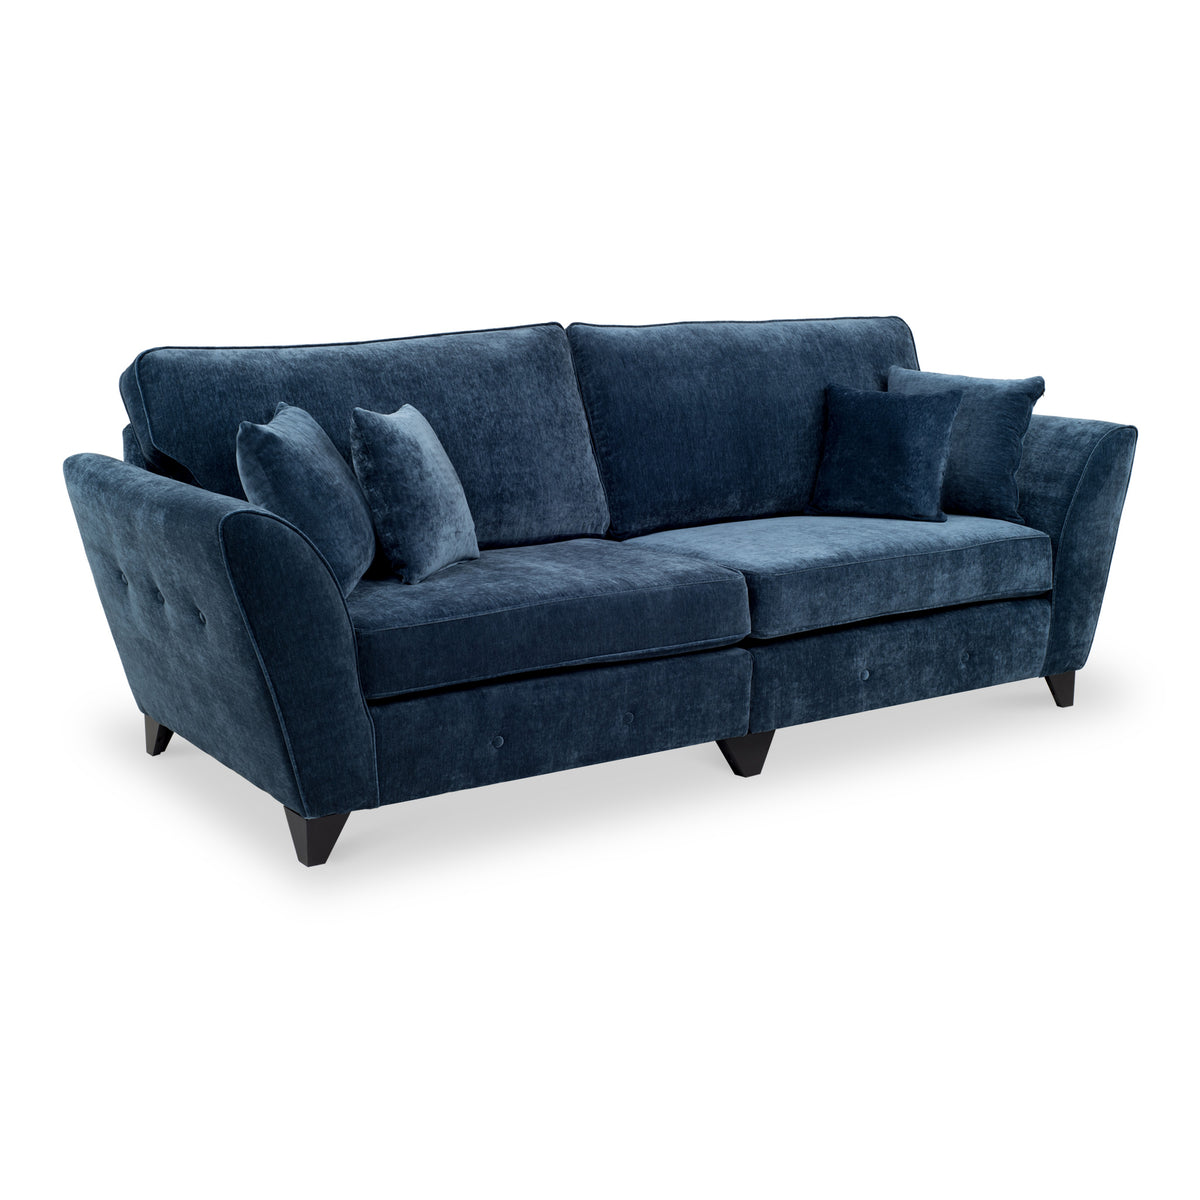 Harris 4 Seater Sofa in Navy by Roseland Furniture